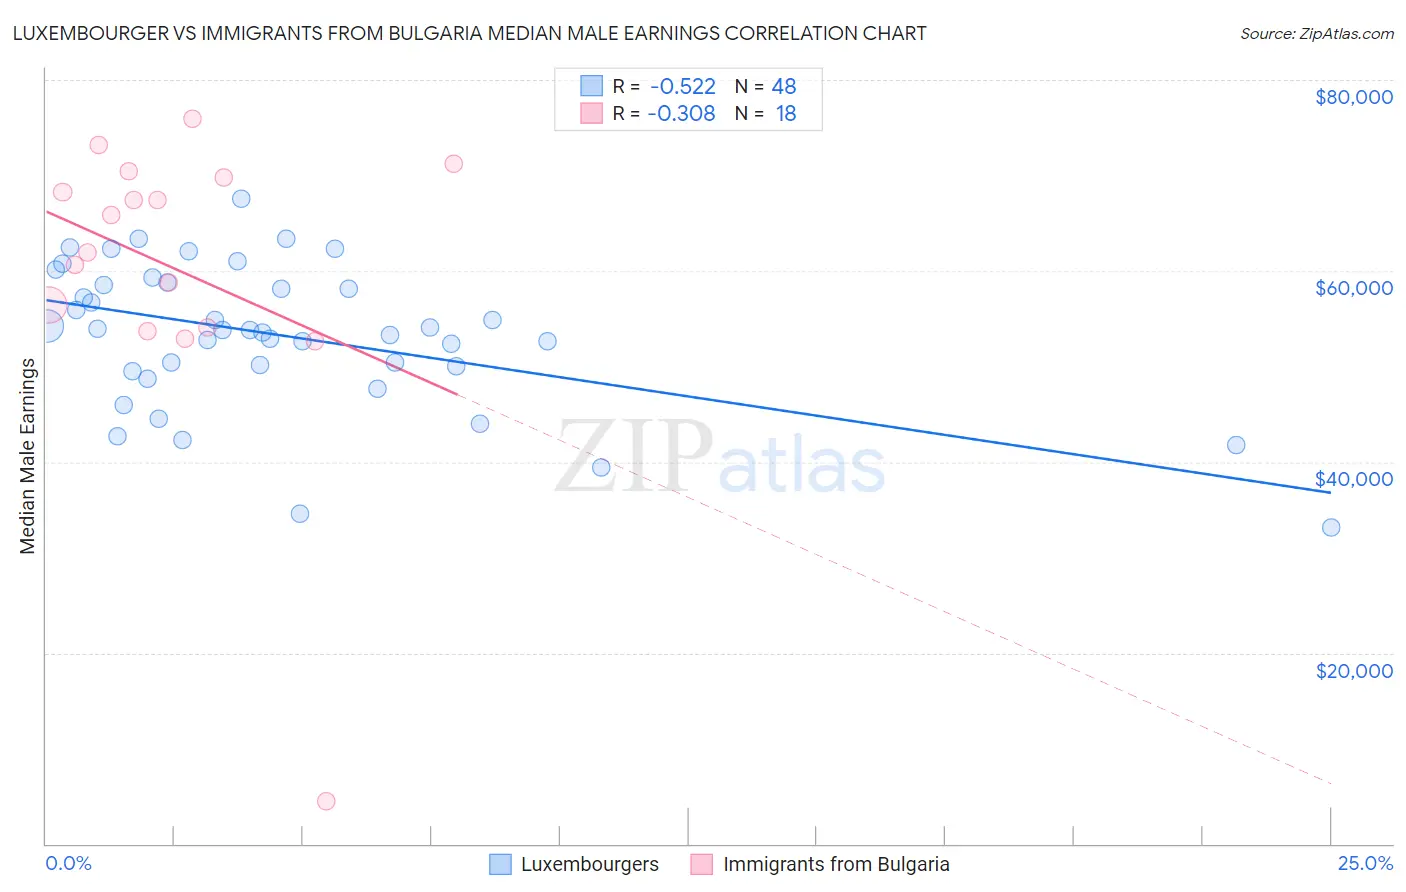 Luxembourger vs Immigrants from Bulgaria Median Male Earnings